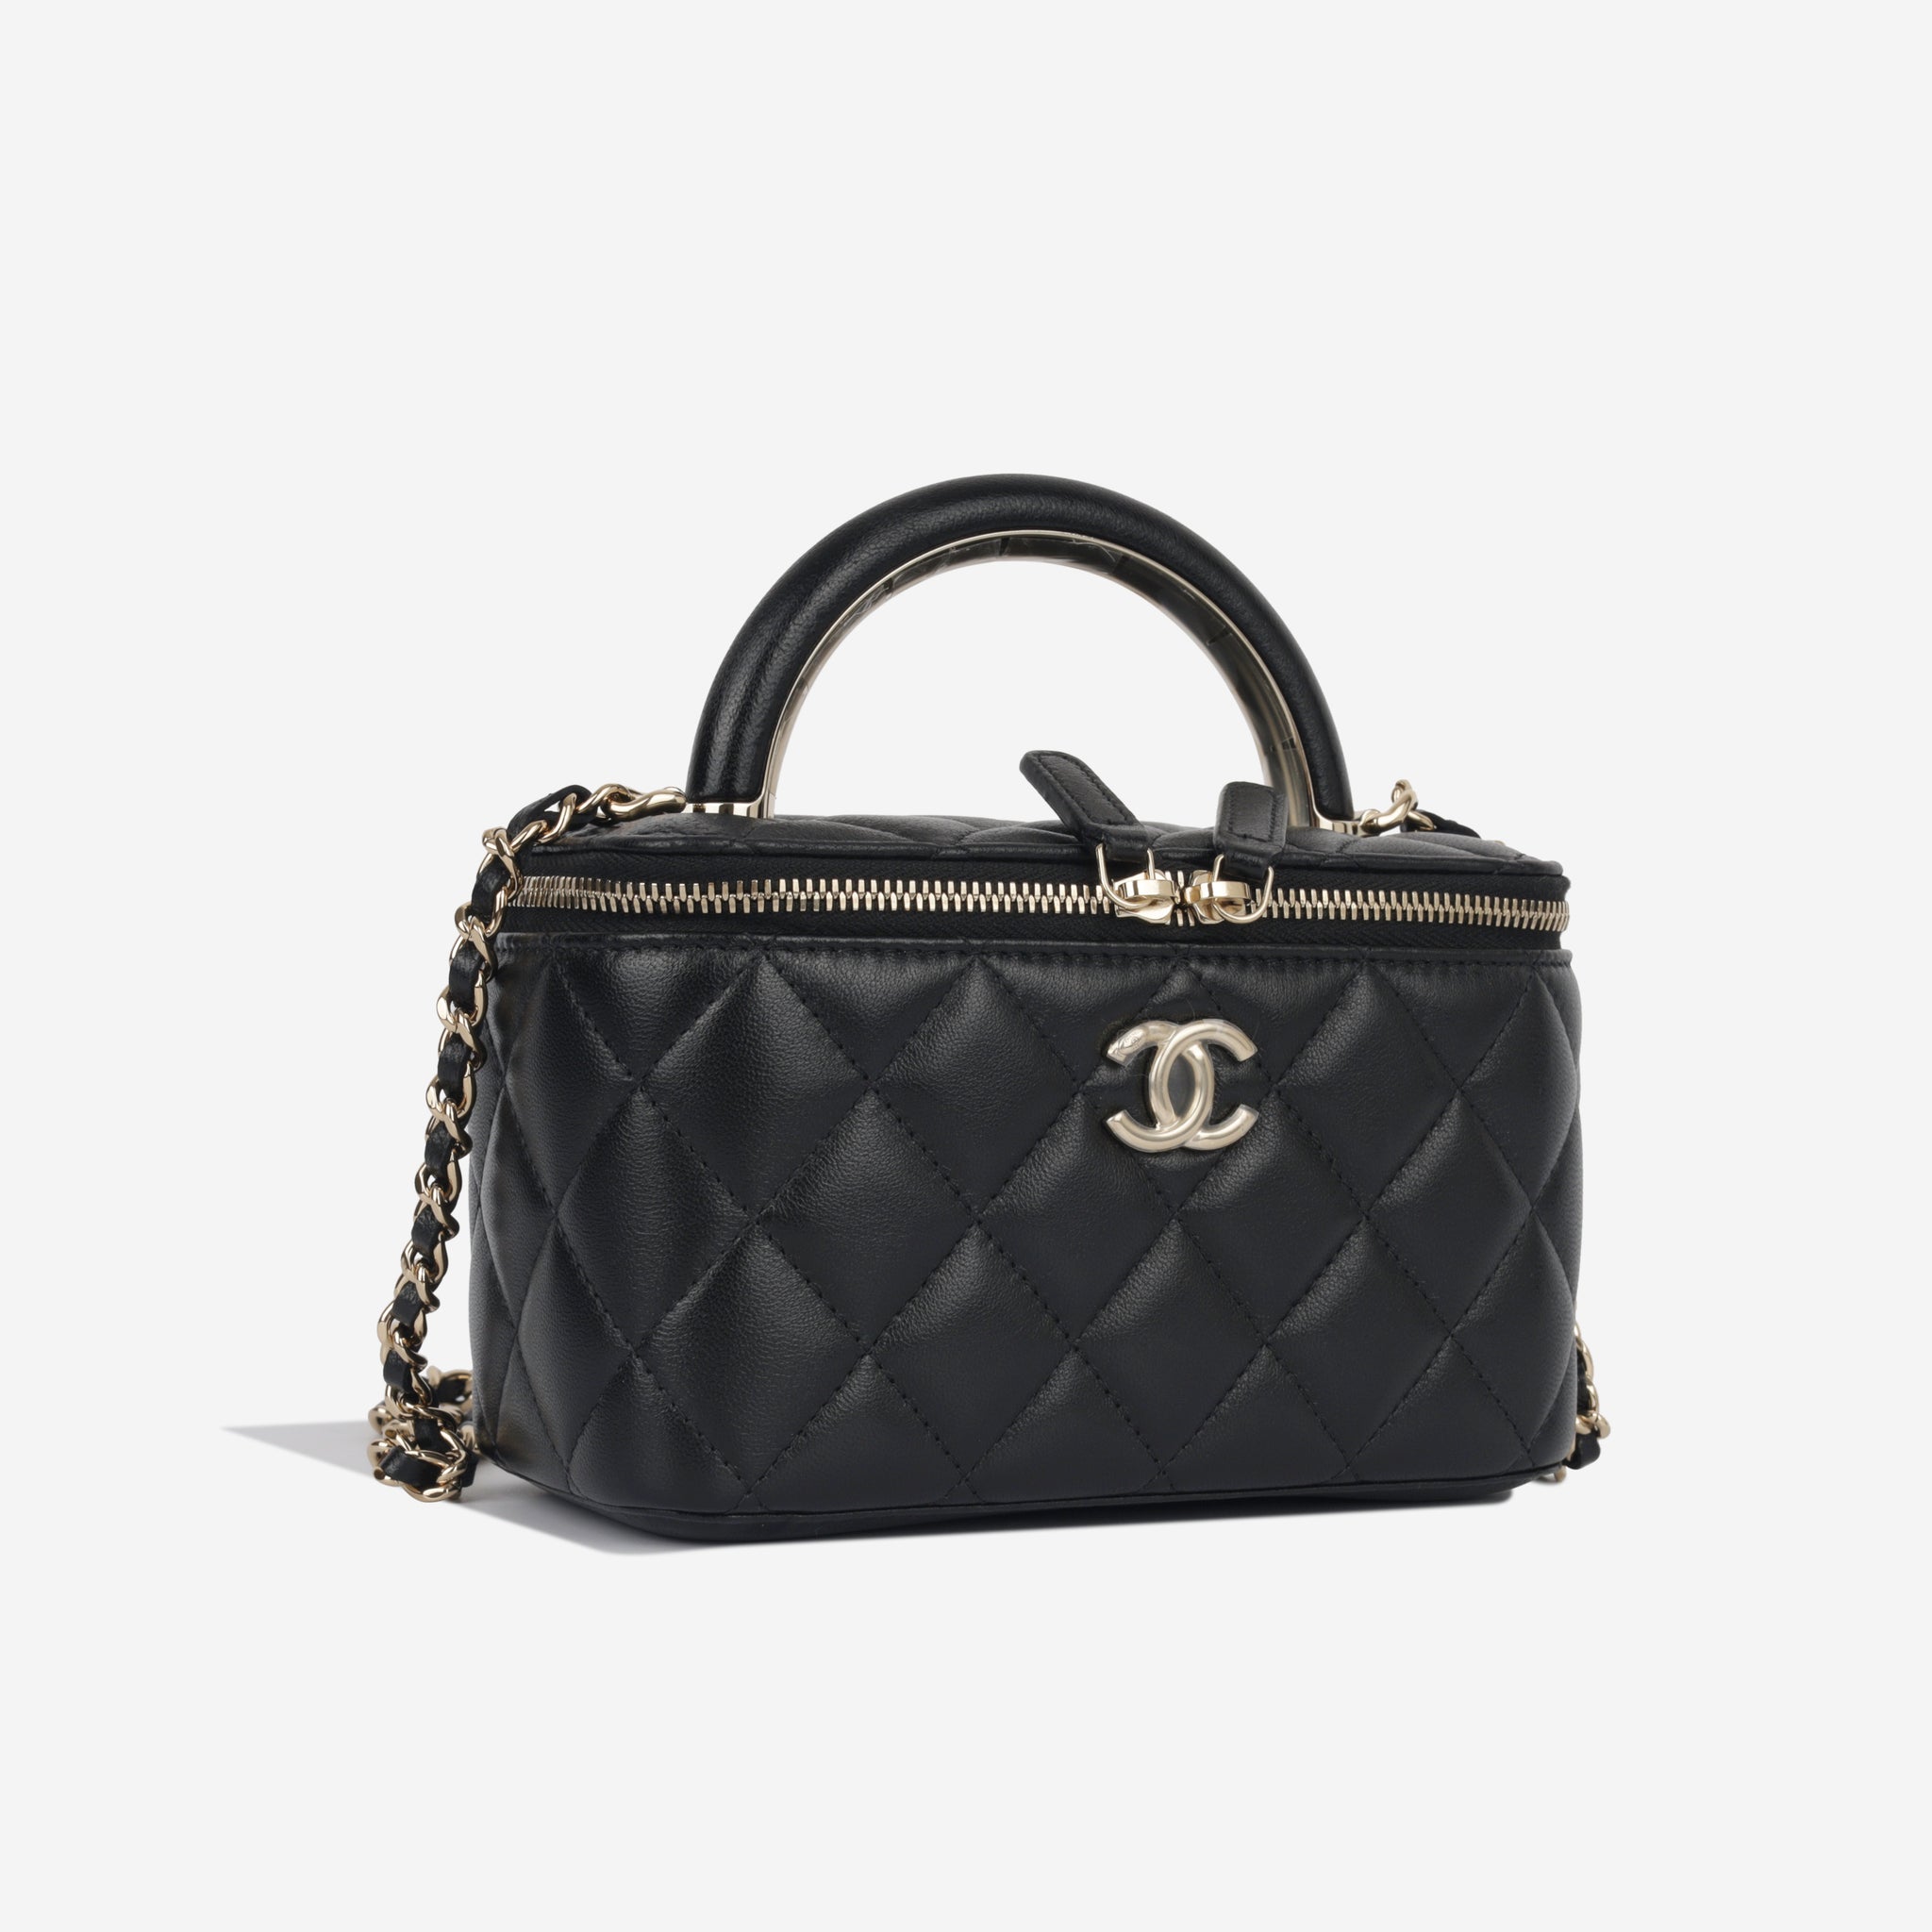 The Chanel Vanity Case An Eras Most Coveted Design  Handbags and  Accessories  Sothebys